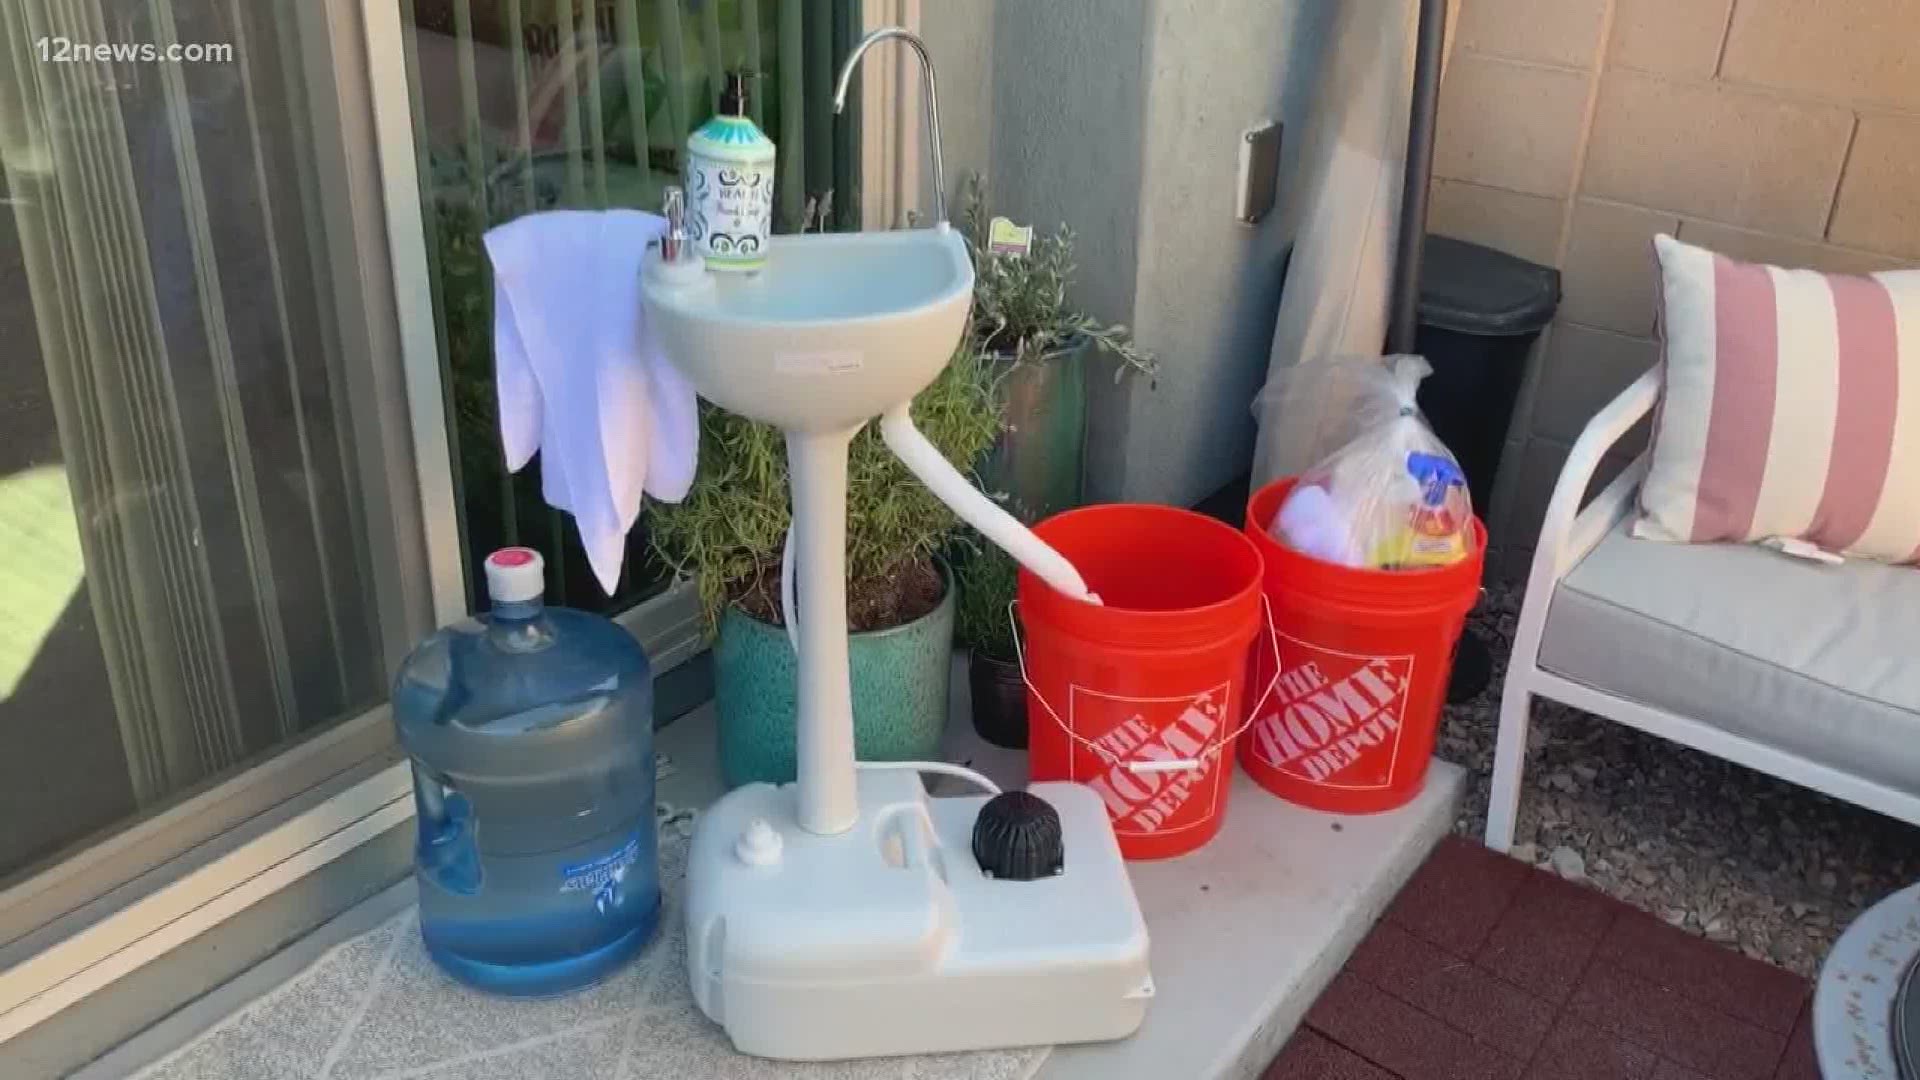 A third of homes on the Navajo Nation don’t have running water, complicating their response to COVID-19. So a woman is raising money to donate handwashing stations.